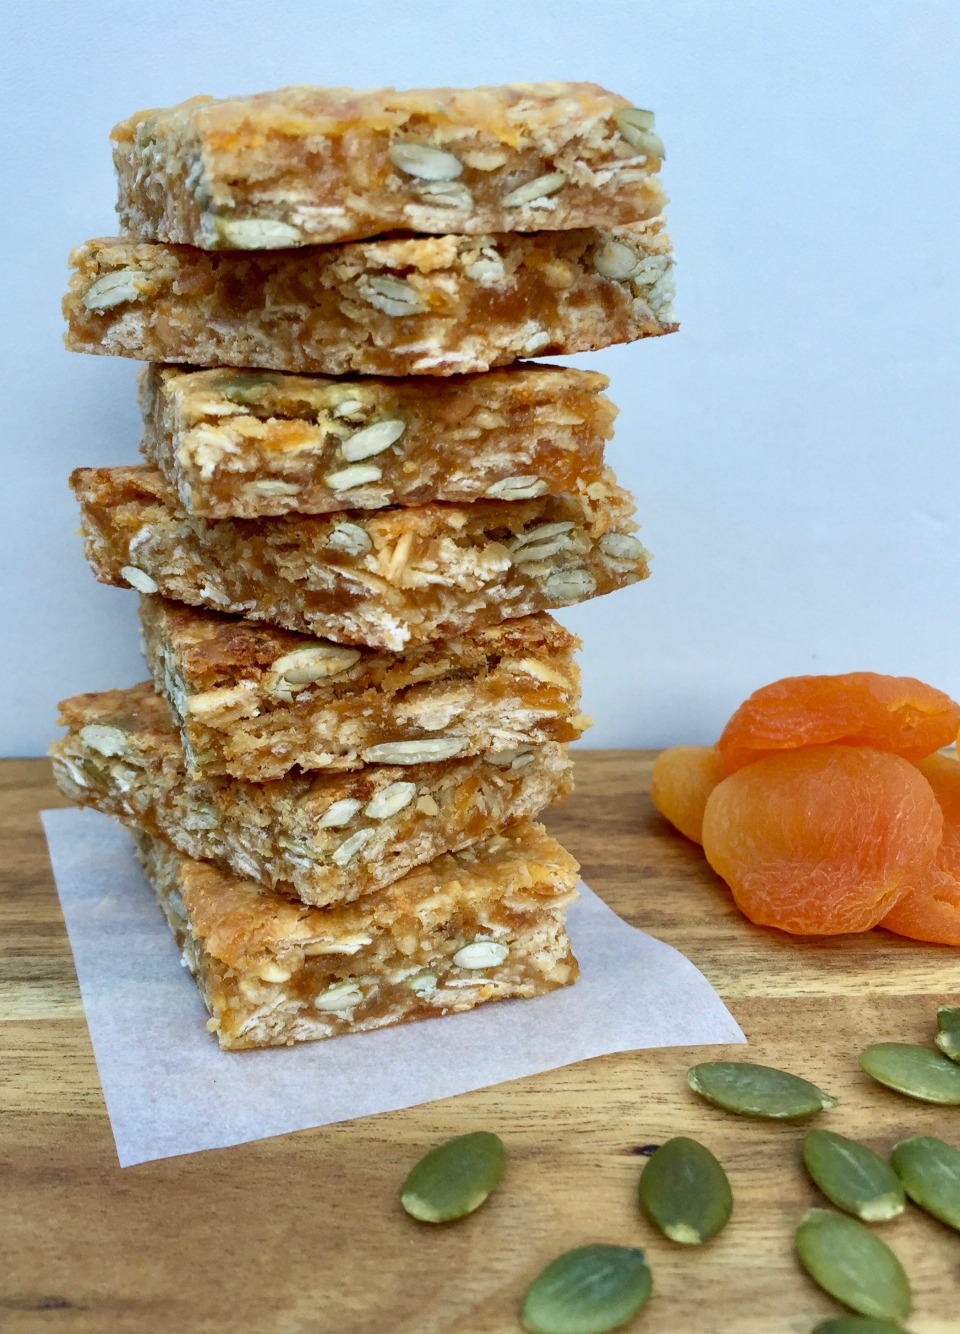 Apricot, Peanut Butter and Oat Slice